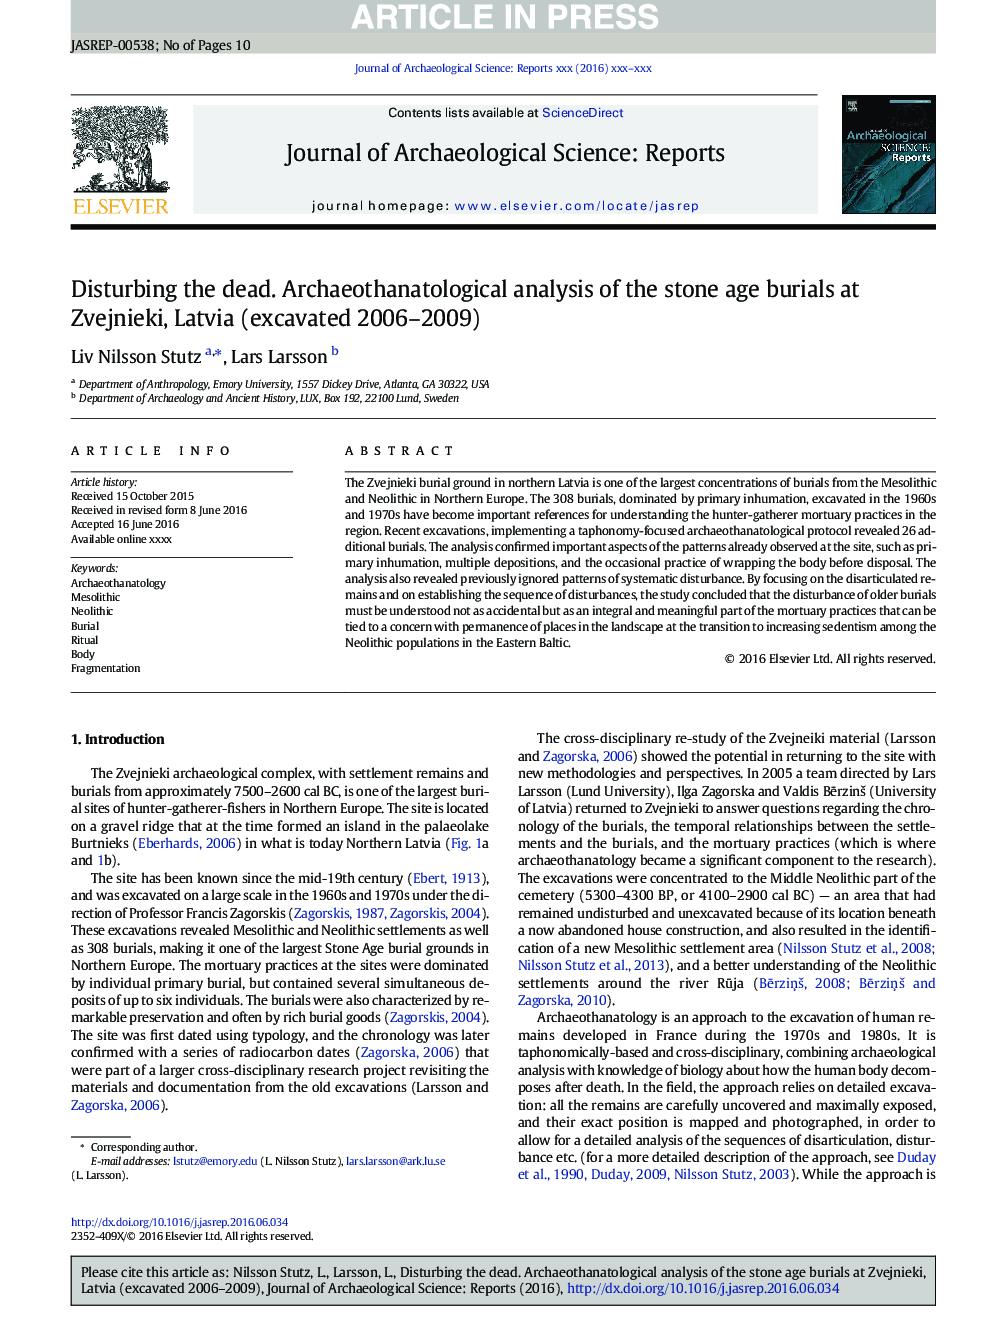 Disturbing the dead. Archaeothanatological analysis of the stone age burials at Zvejnieki, Latvia (excavated 2006-2009)